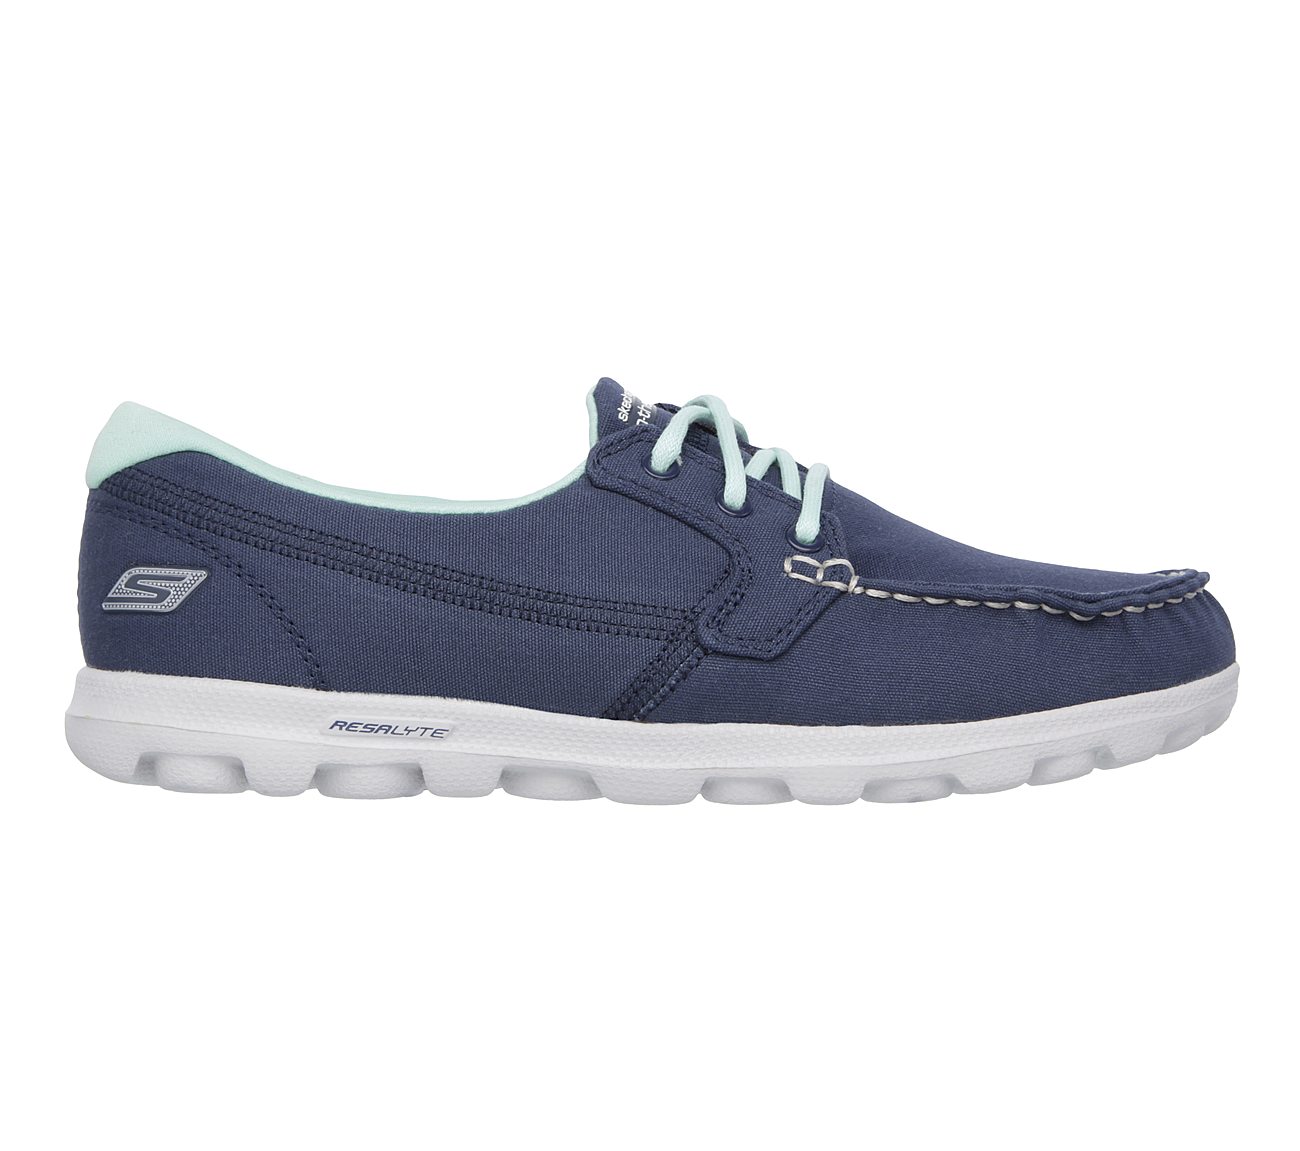 Clipper Skechers On the GO Shoes